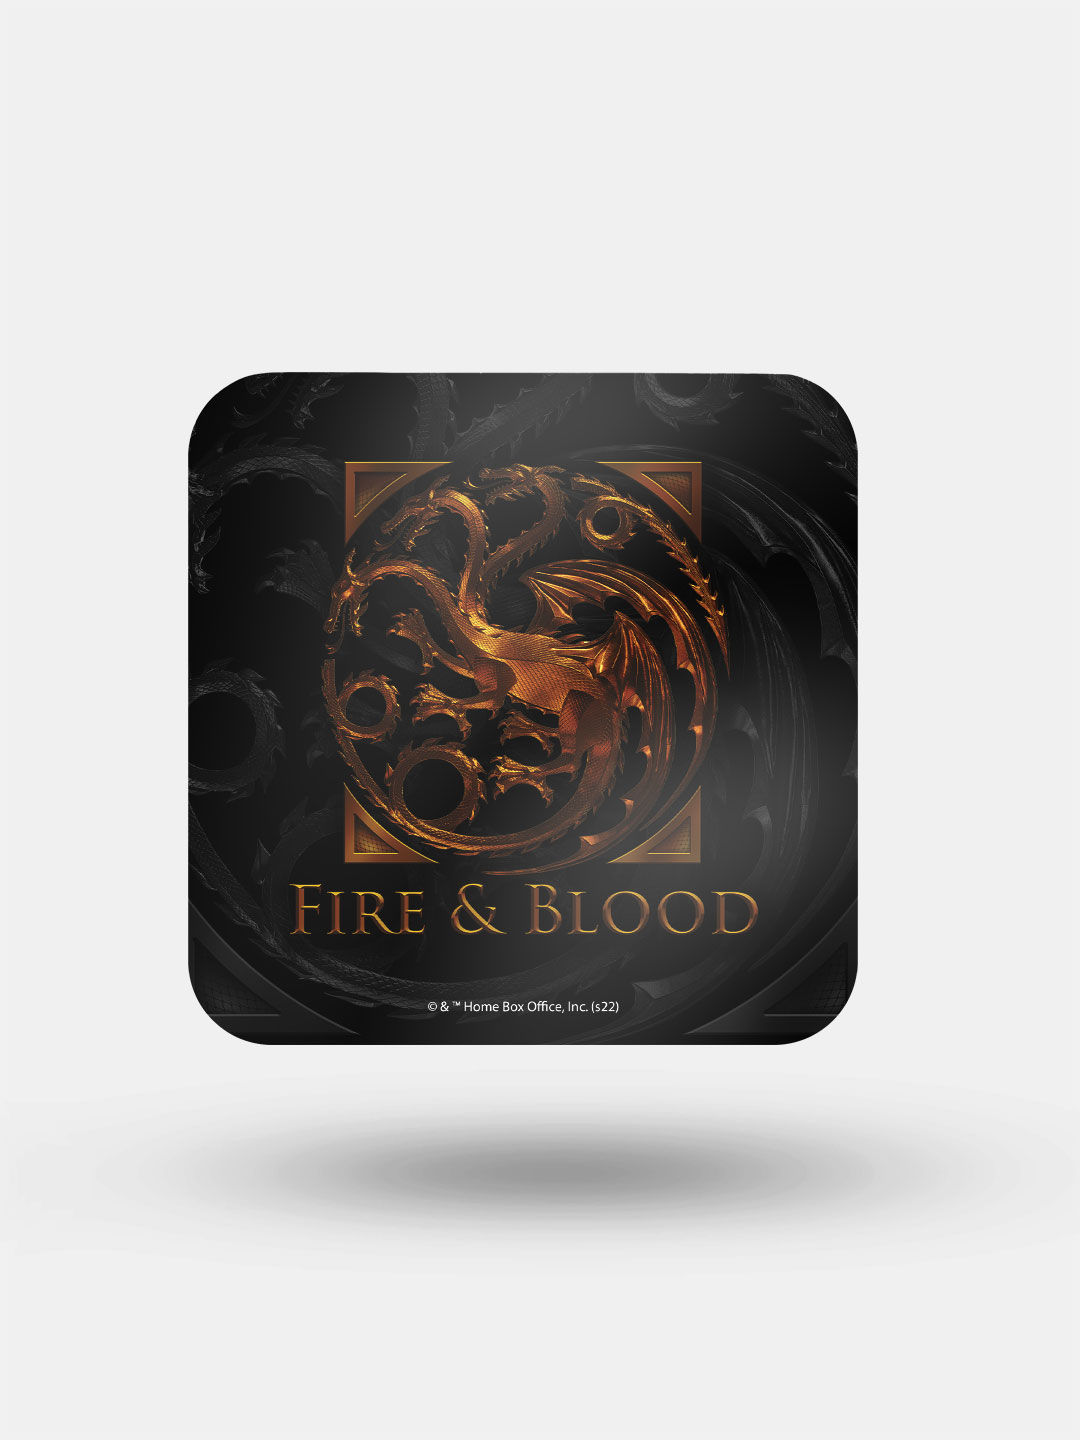 Buy HOD Fire and blood - 10 X 10 (cm) Square Coasters Coasters Online